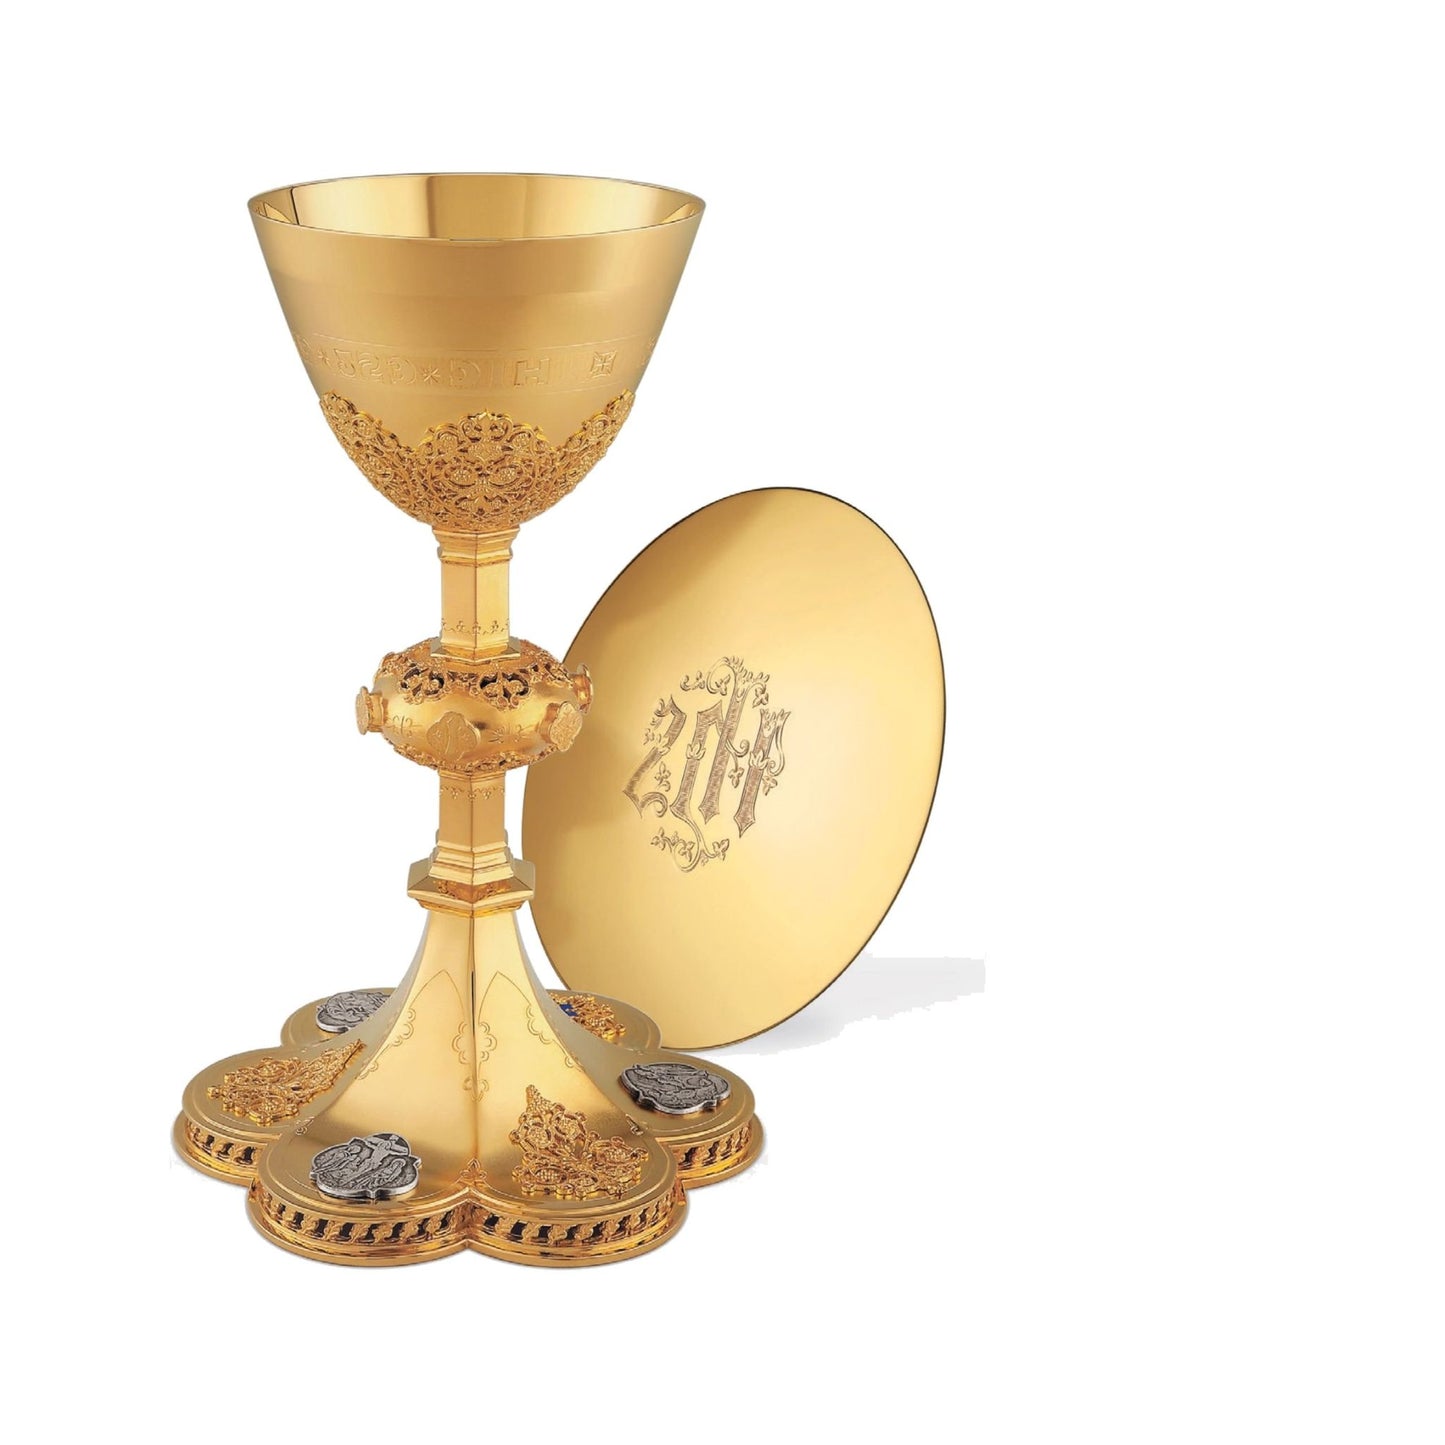 Chalice & Scale Paten with medallions depicting the Life of Christ